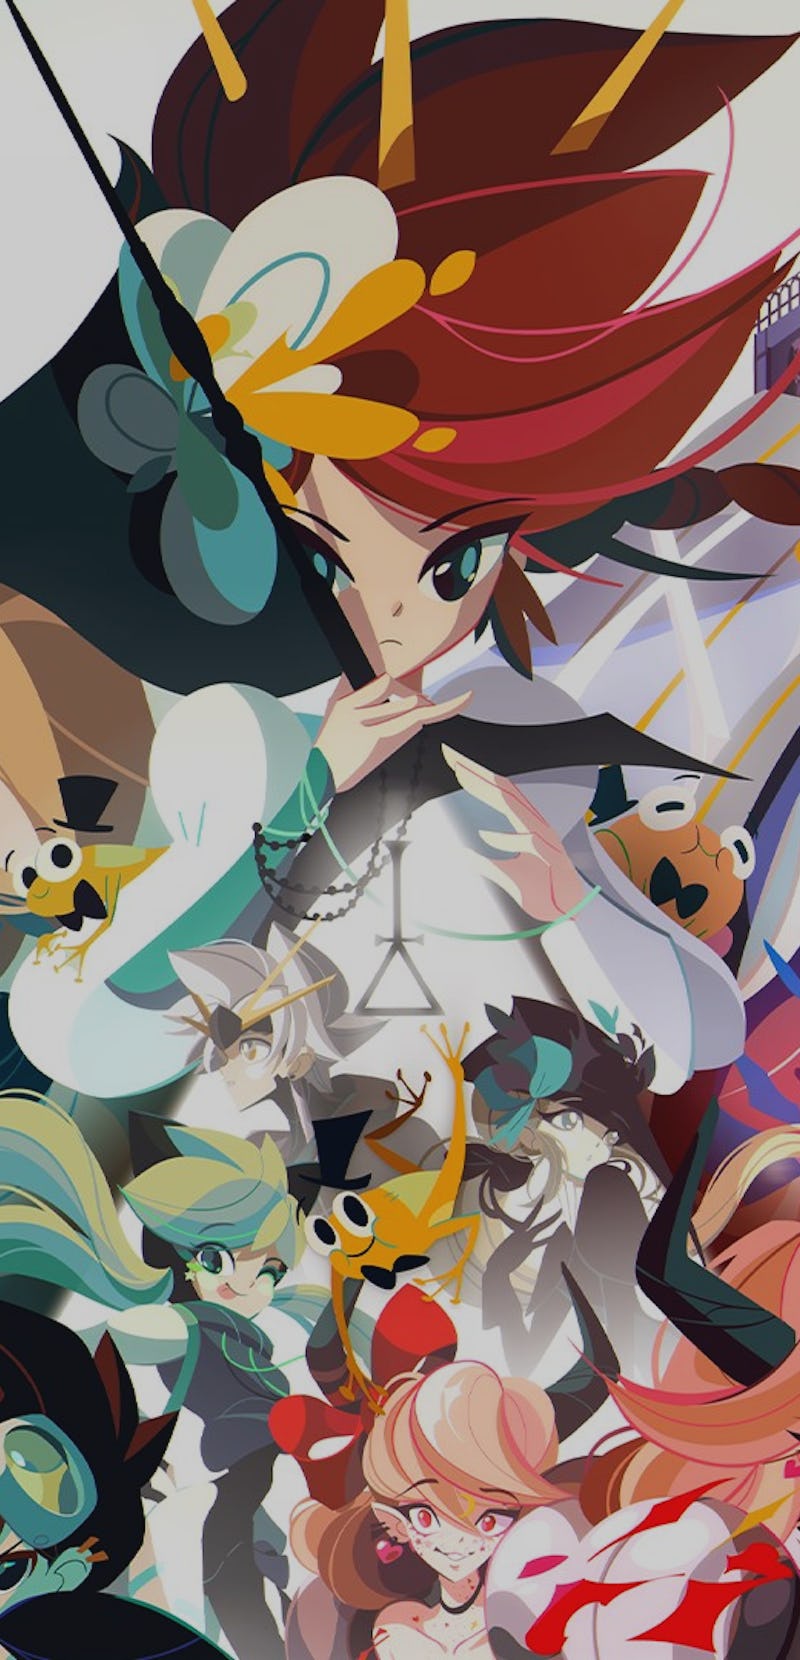 Characters in poster art from the game CrisTales